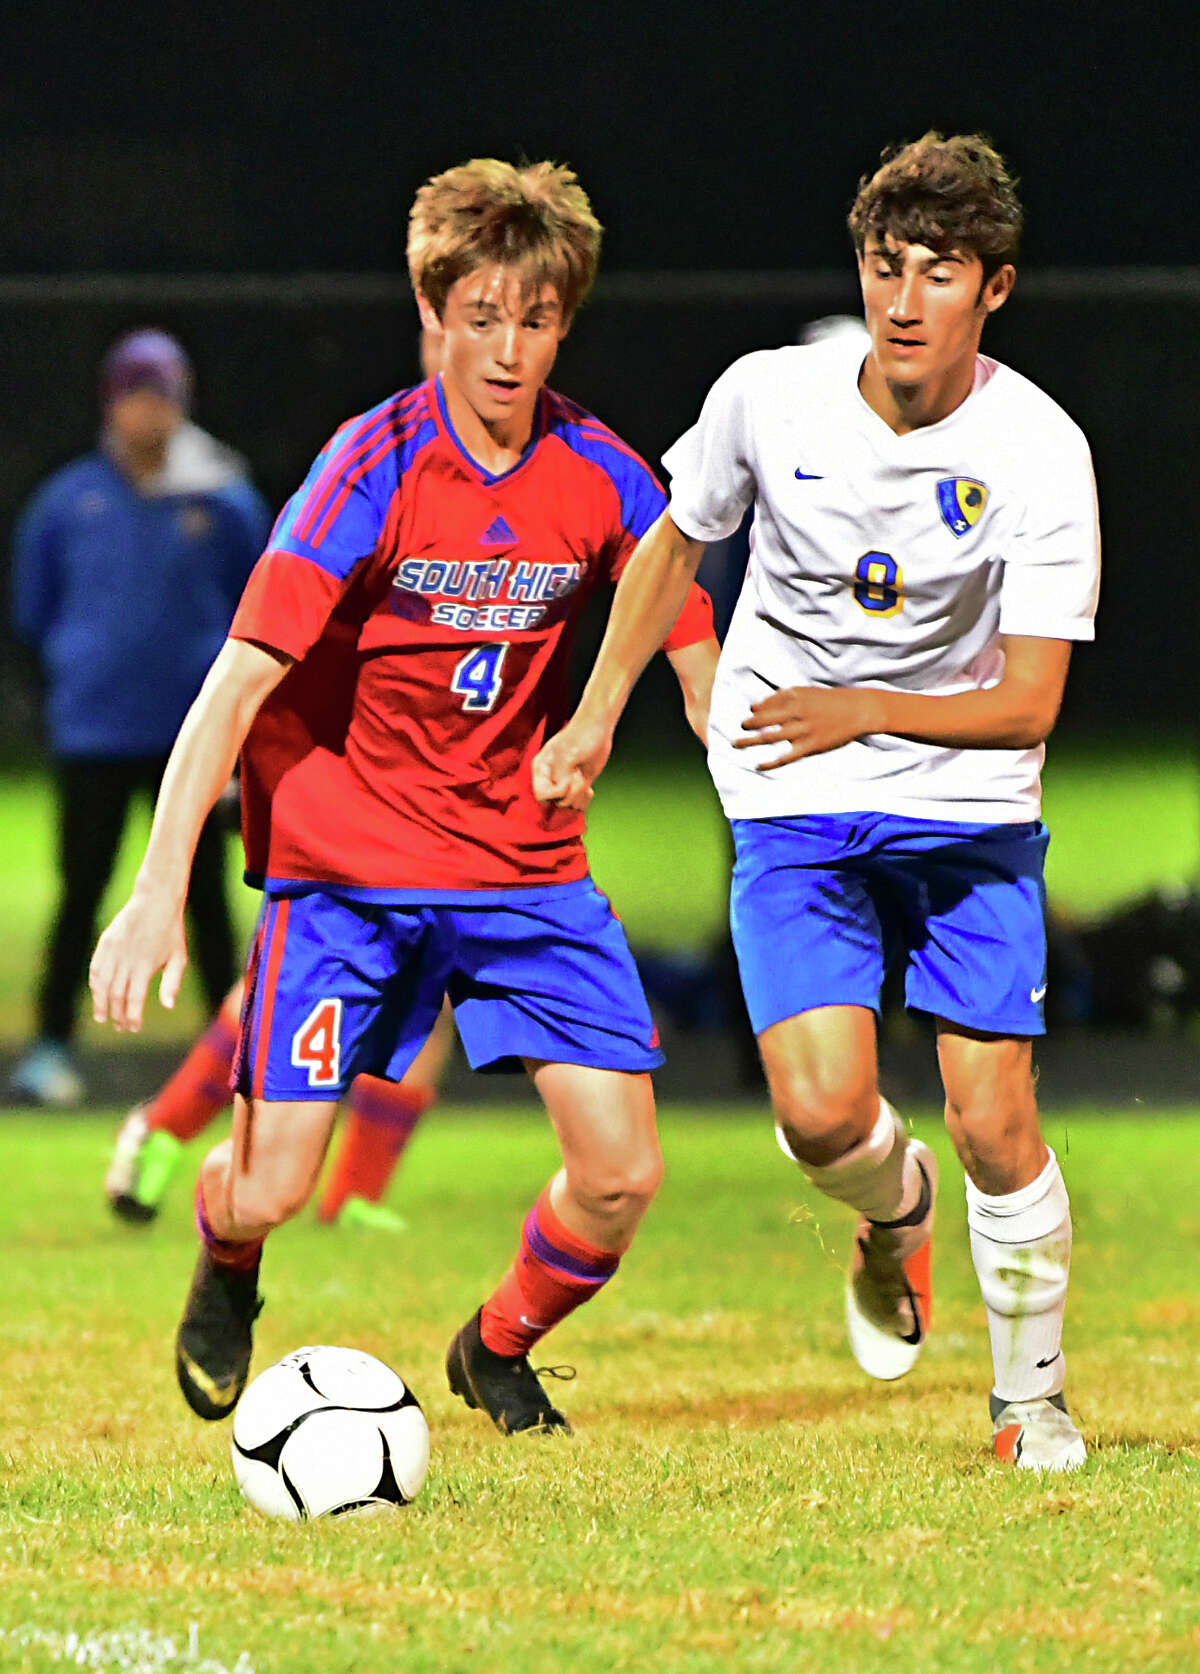 South Glens Falls' Bobby Bruschini, left, battles for the ball with Queensbury's Alejandro Garcia-Barrientos during a soccer game on Wednesday, Oct. 2, 2019 in South Glens Falls. This coming season won't happen until spring. (Lori Van Buren/Times Union)